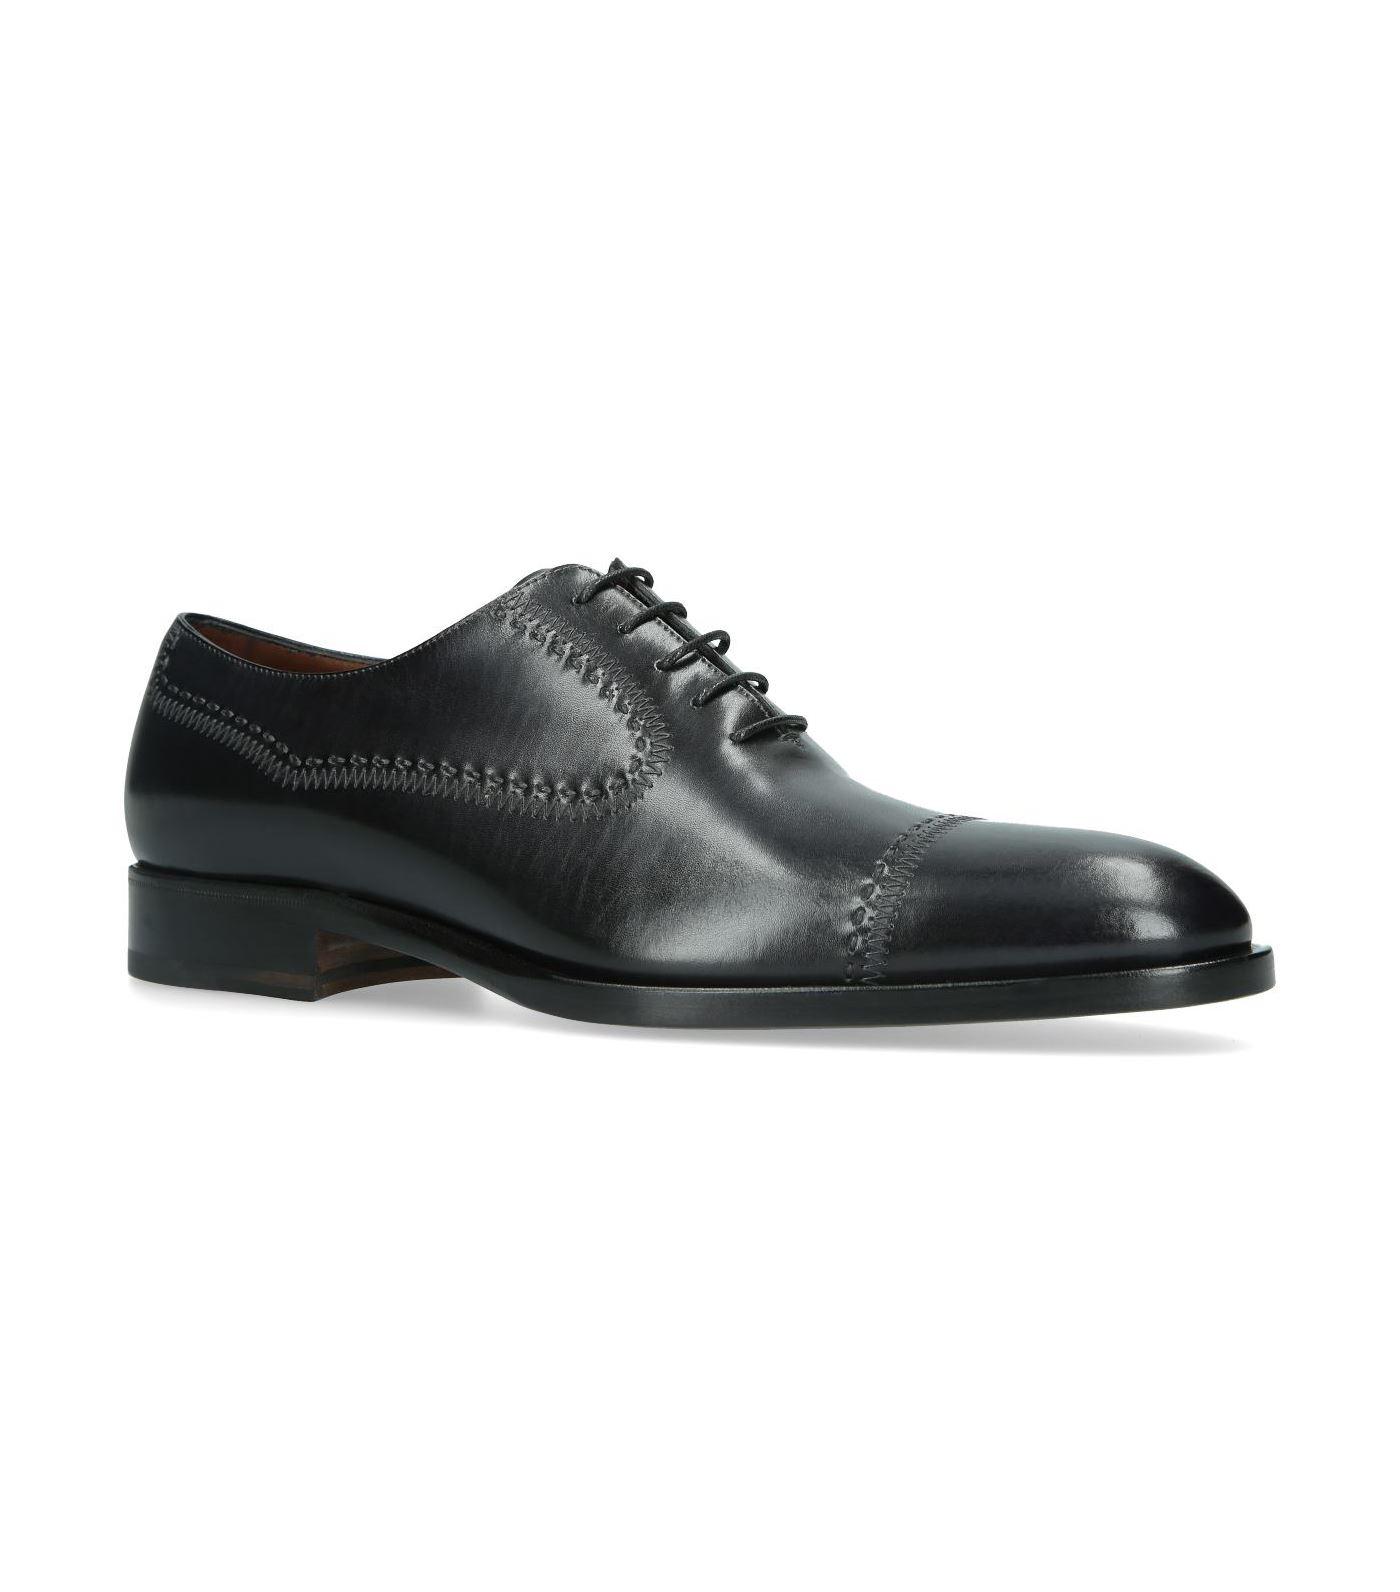 Fratelli Rossetti Stitch Detailoxford Shoes in Black for Men - Lyst